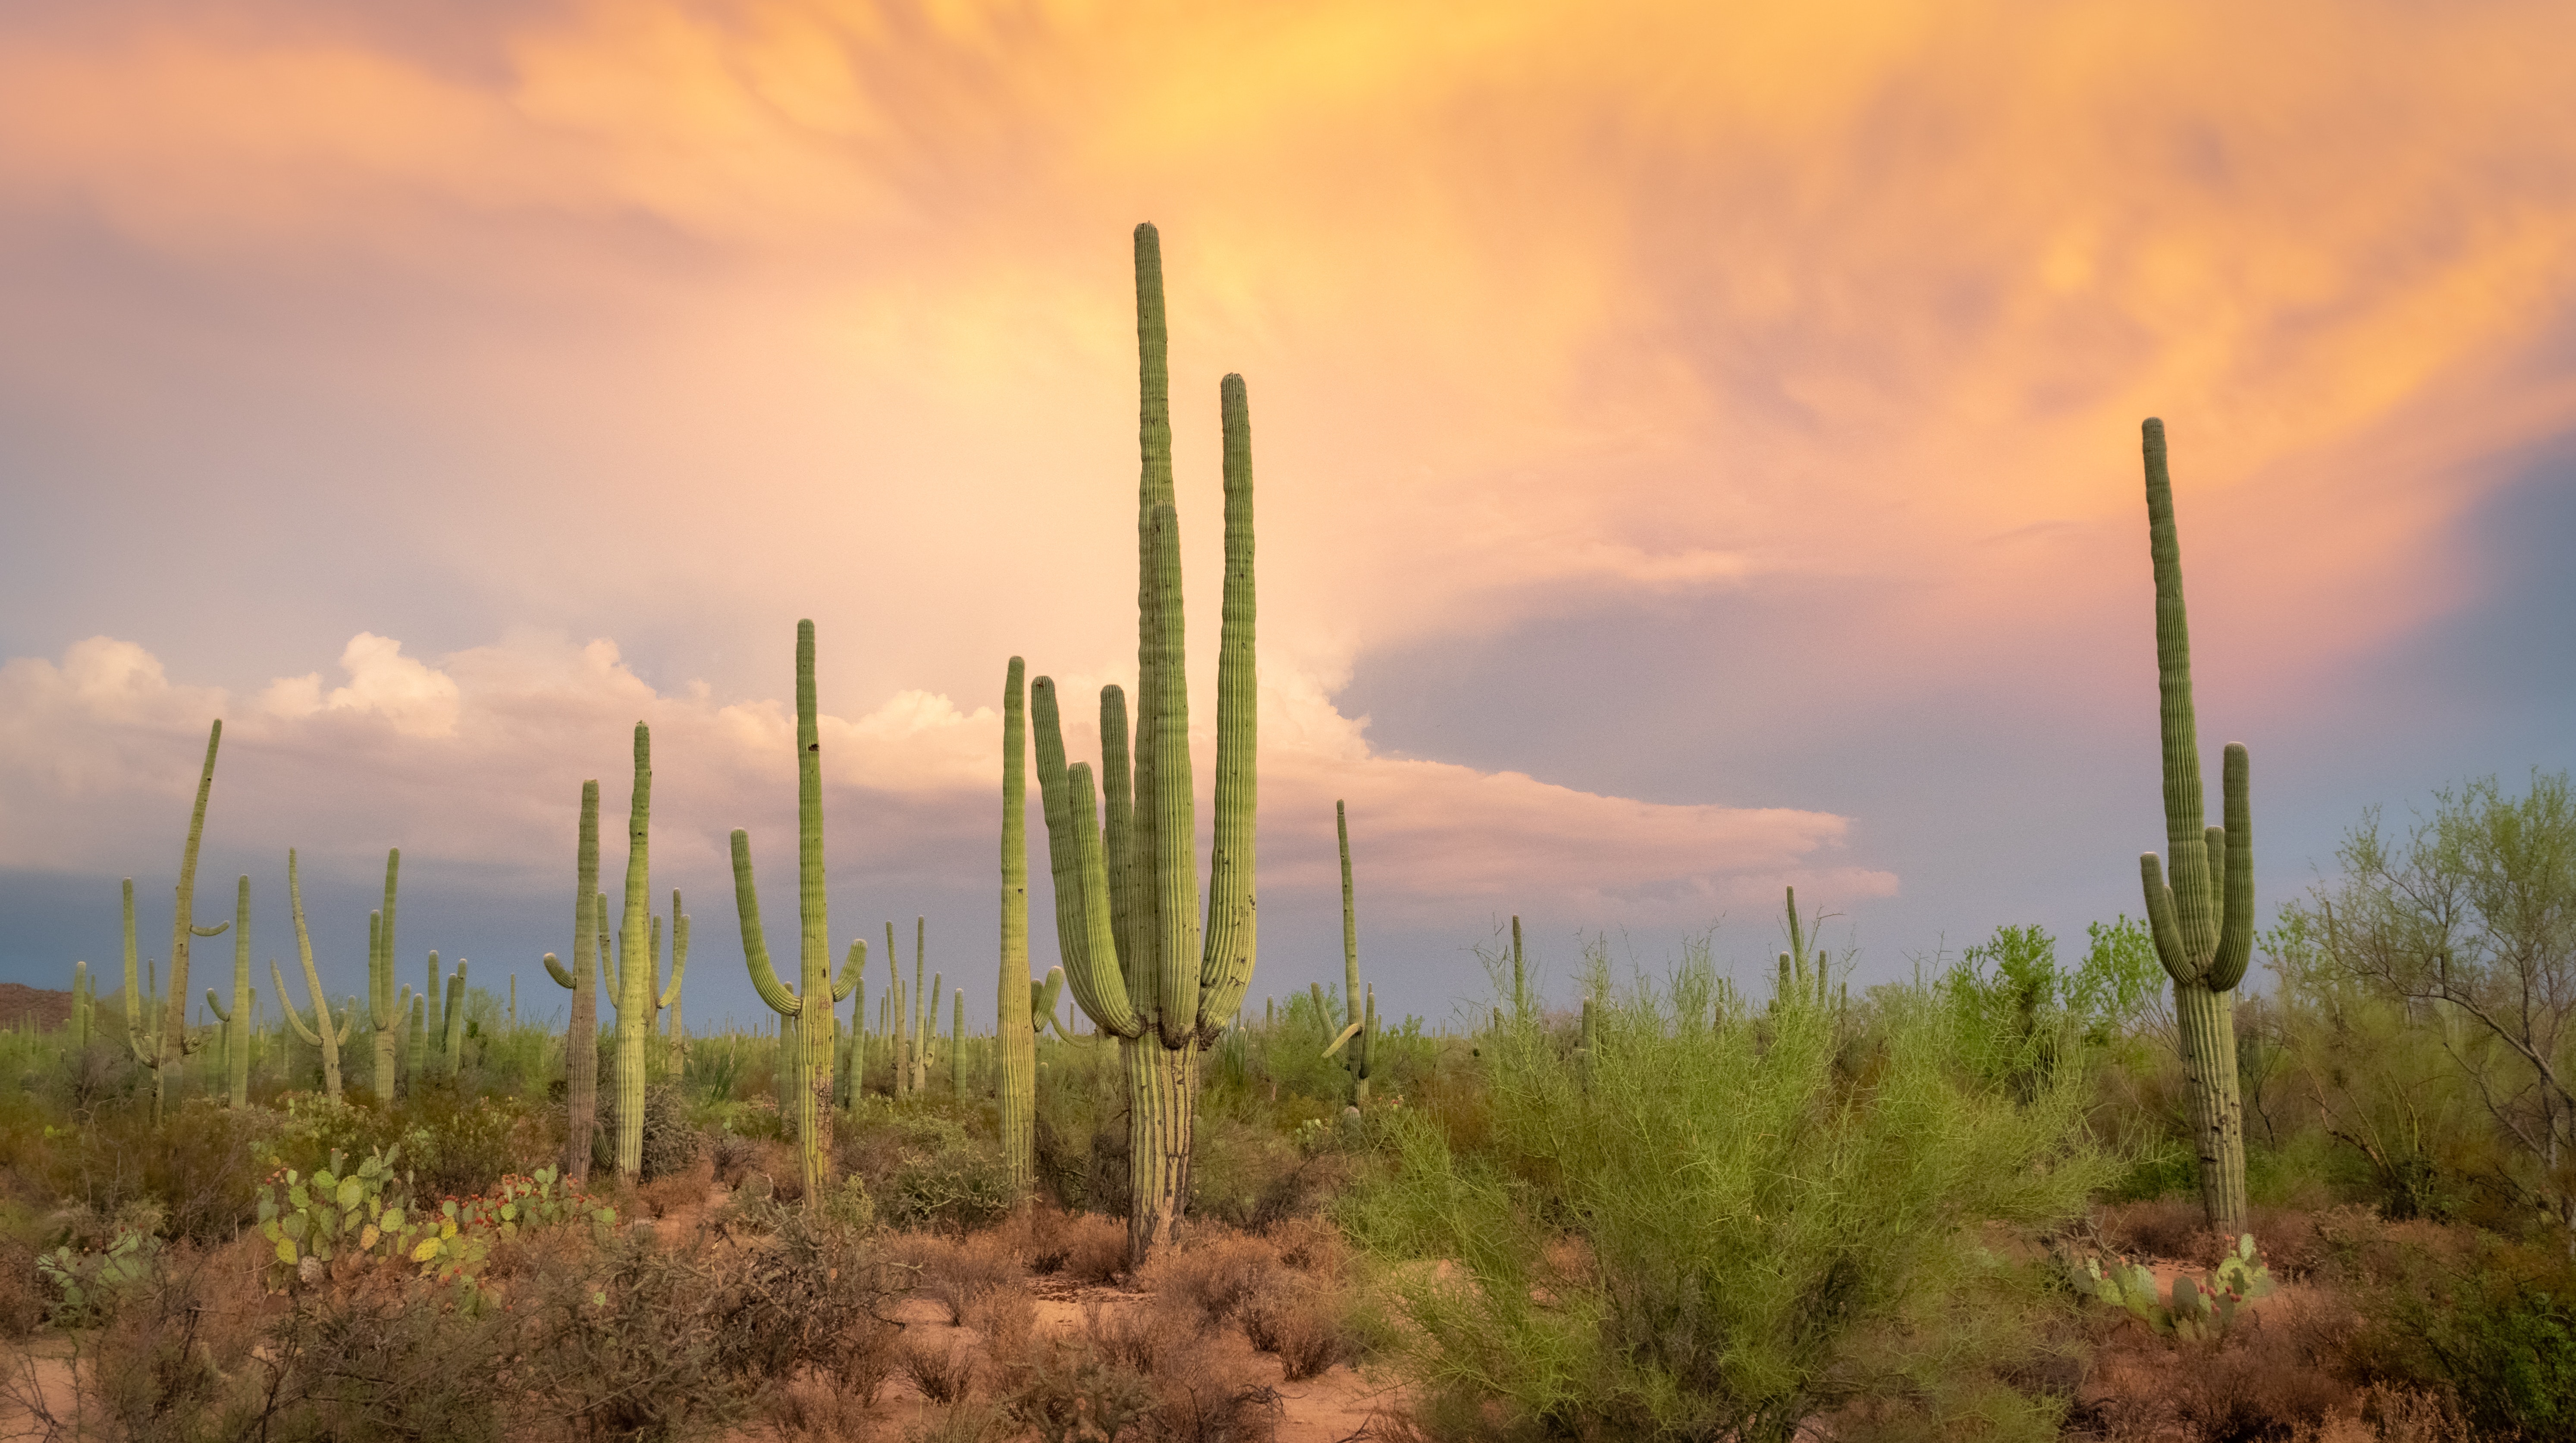 Background art with Arizona pink and yellow clouds in backdrop and saguaro cacti in foreground